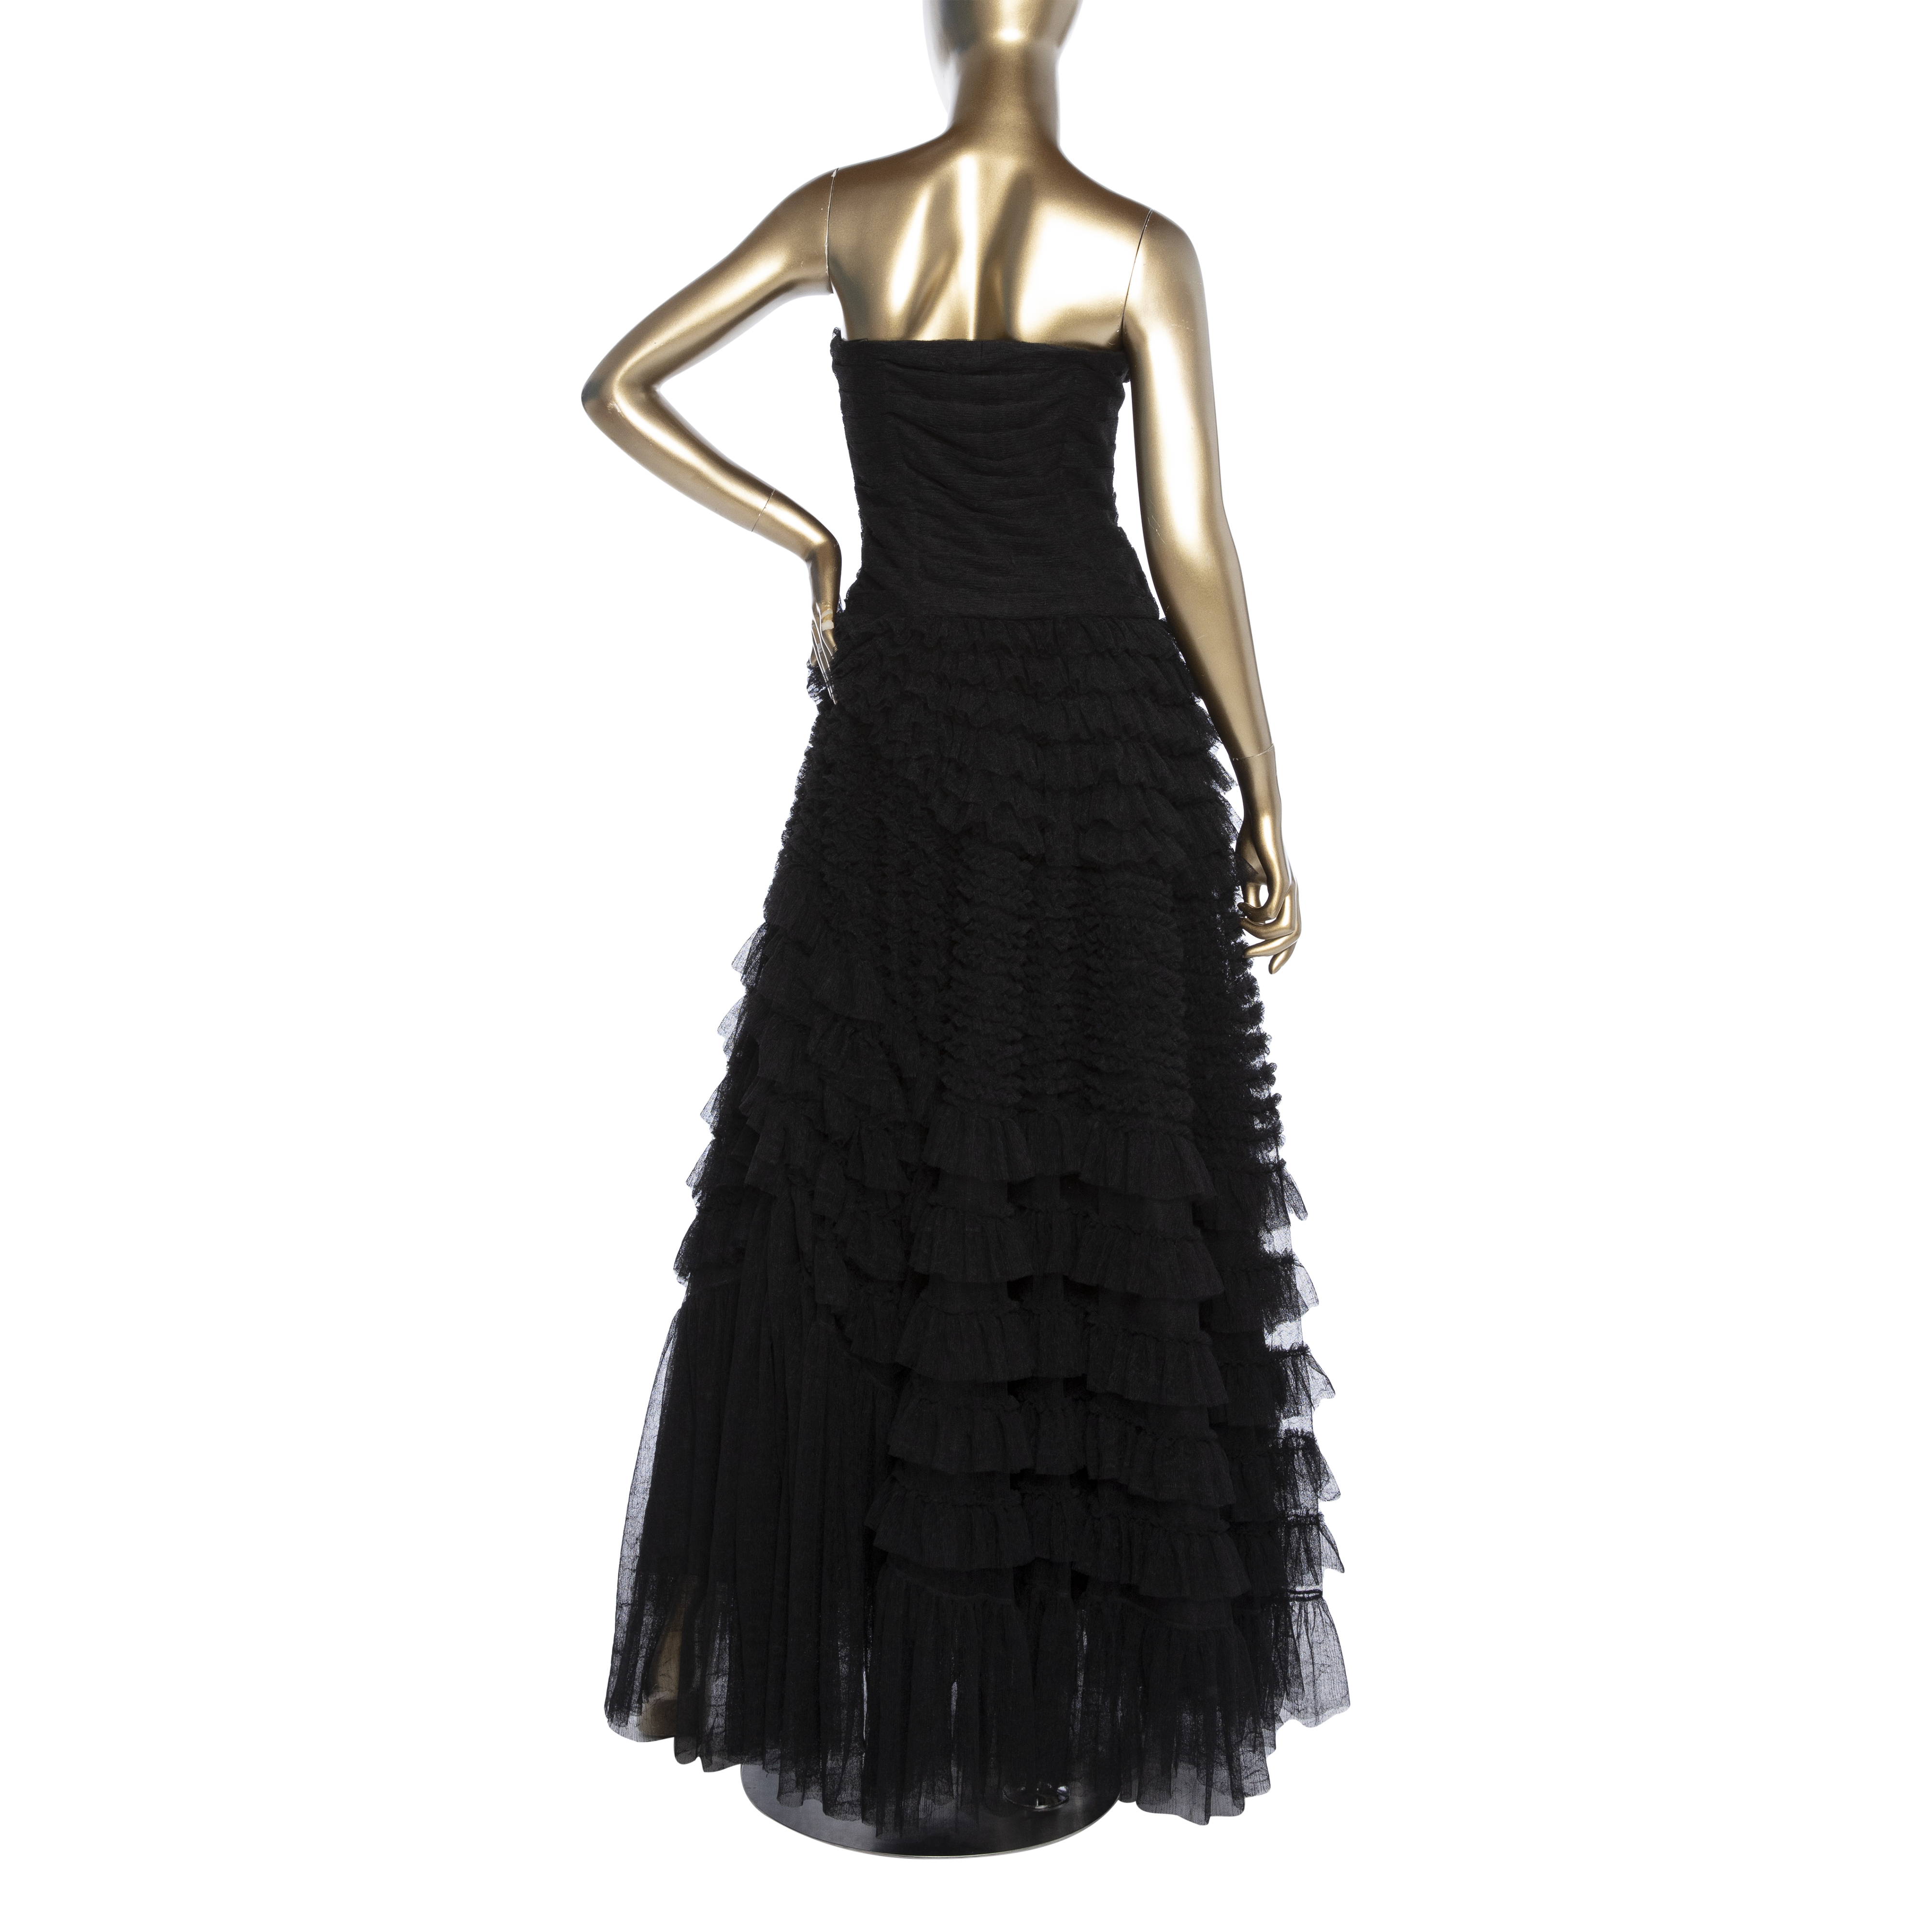 STARPIECE! CHRISTIAN DIOR COUTURE 2020 GOLD EMBROIDERED TULLE MAXI DRESS  (FR36)